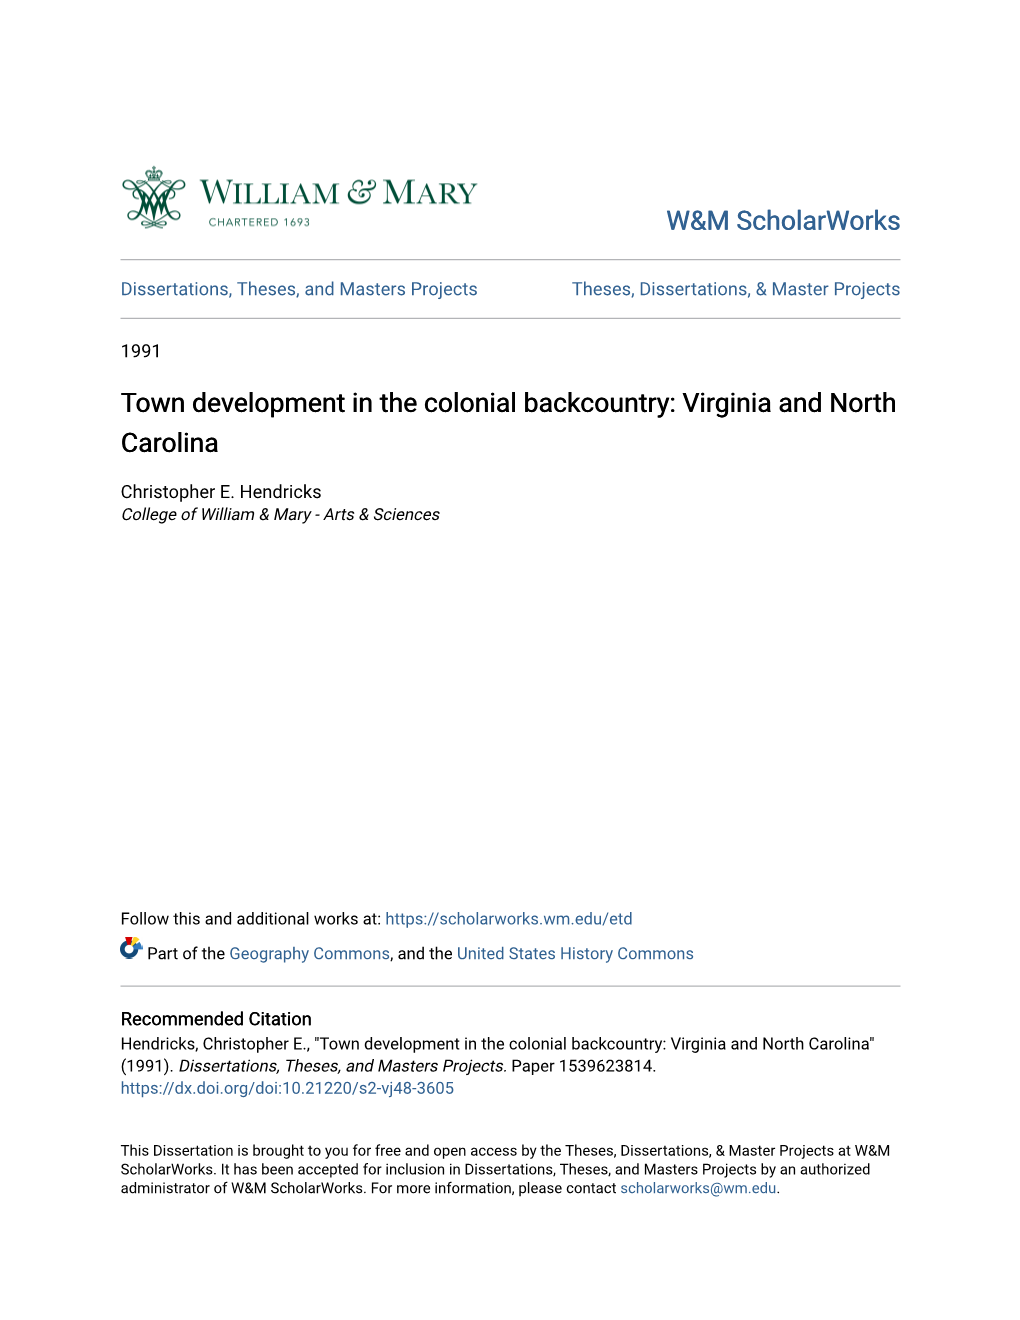 Town Development in the Colonial Backcountry: Virginia and North Carolina